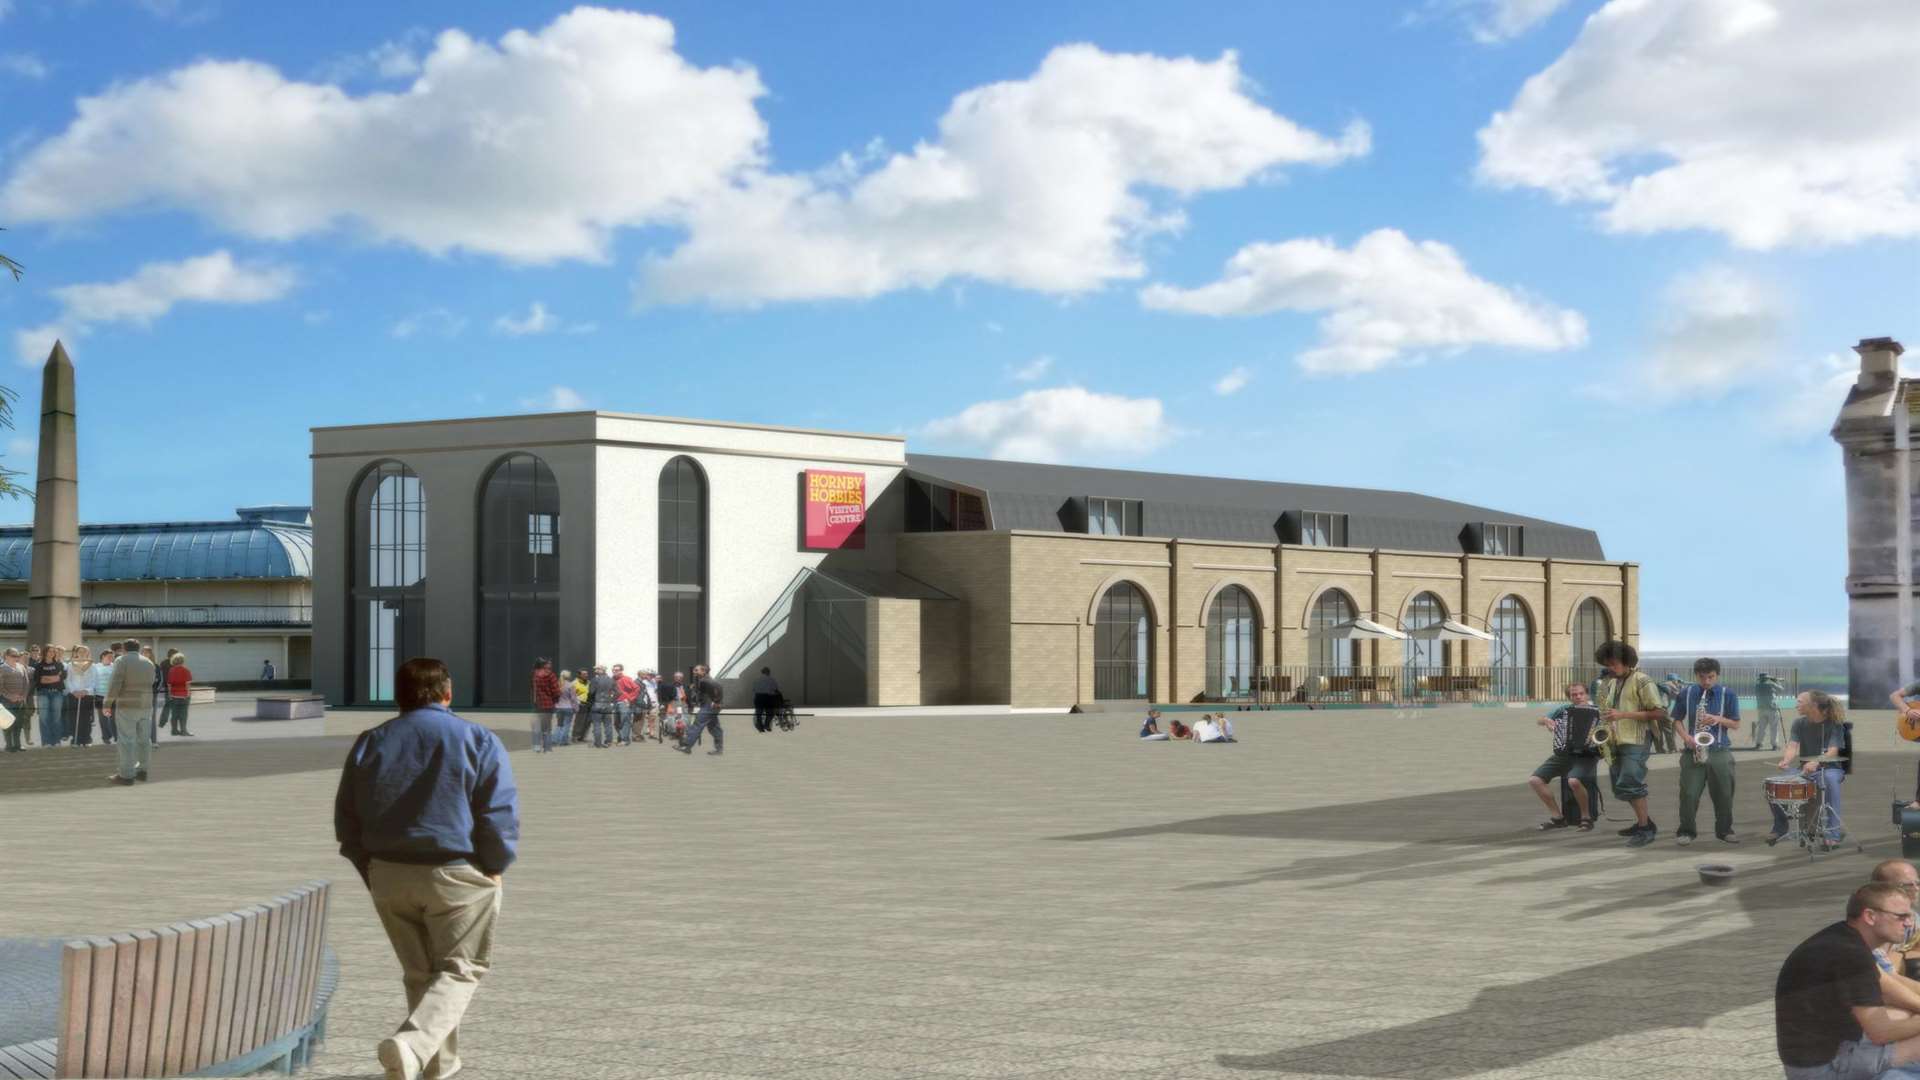 Hornby had hoped to have its new £1.6 million visitor centre open by Easter